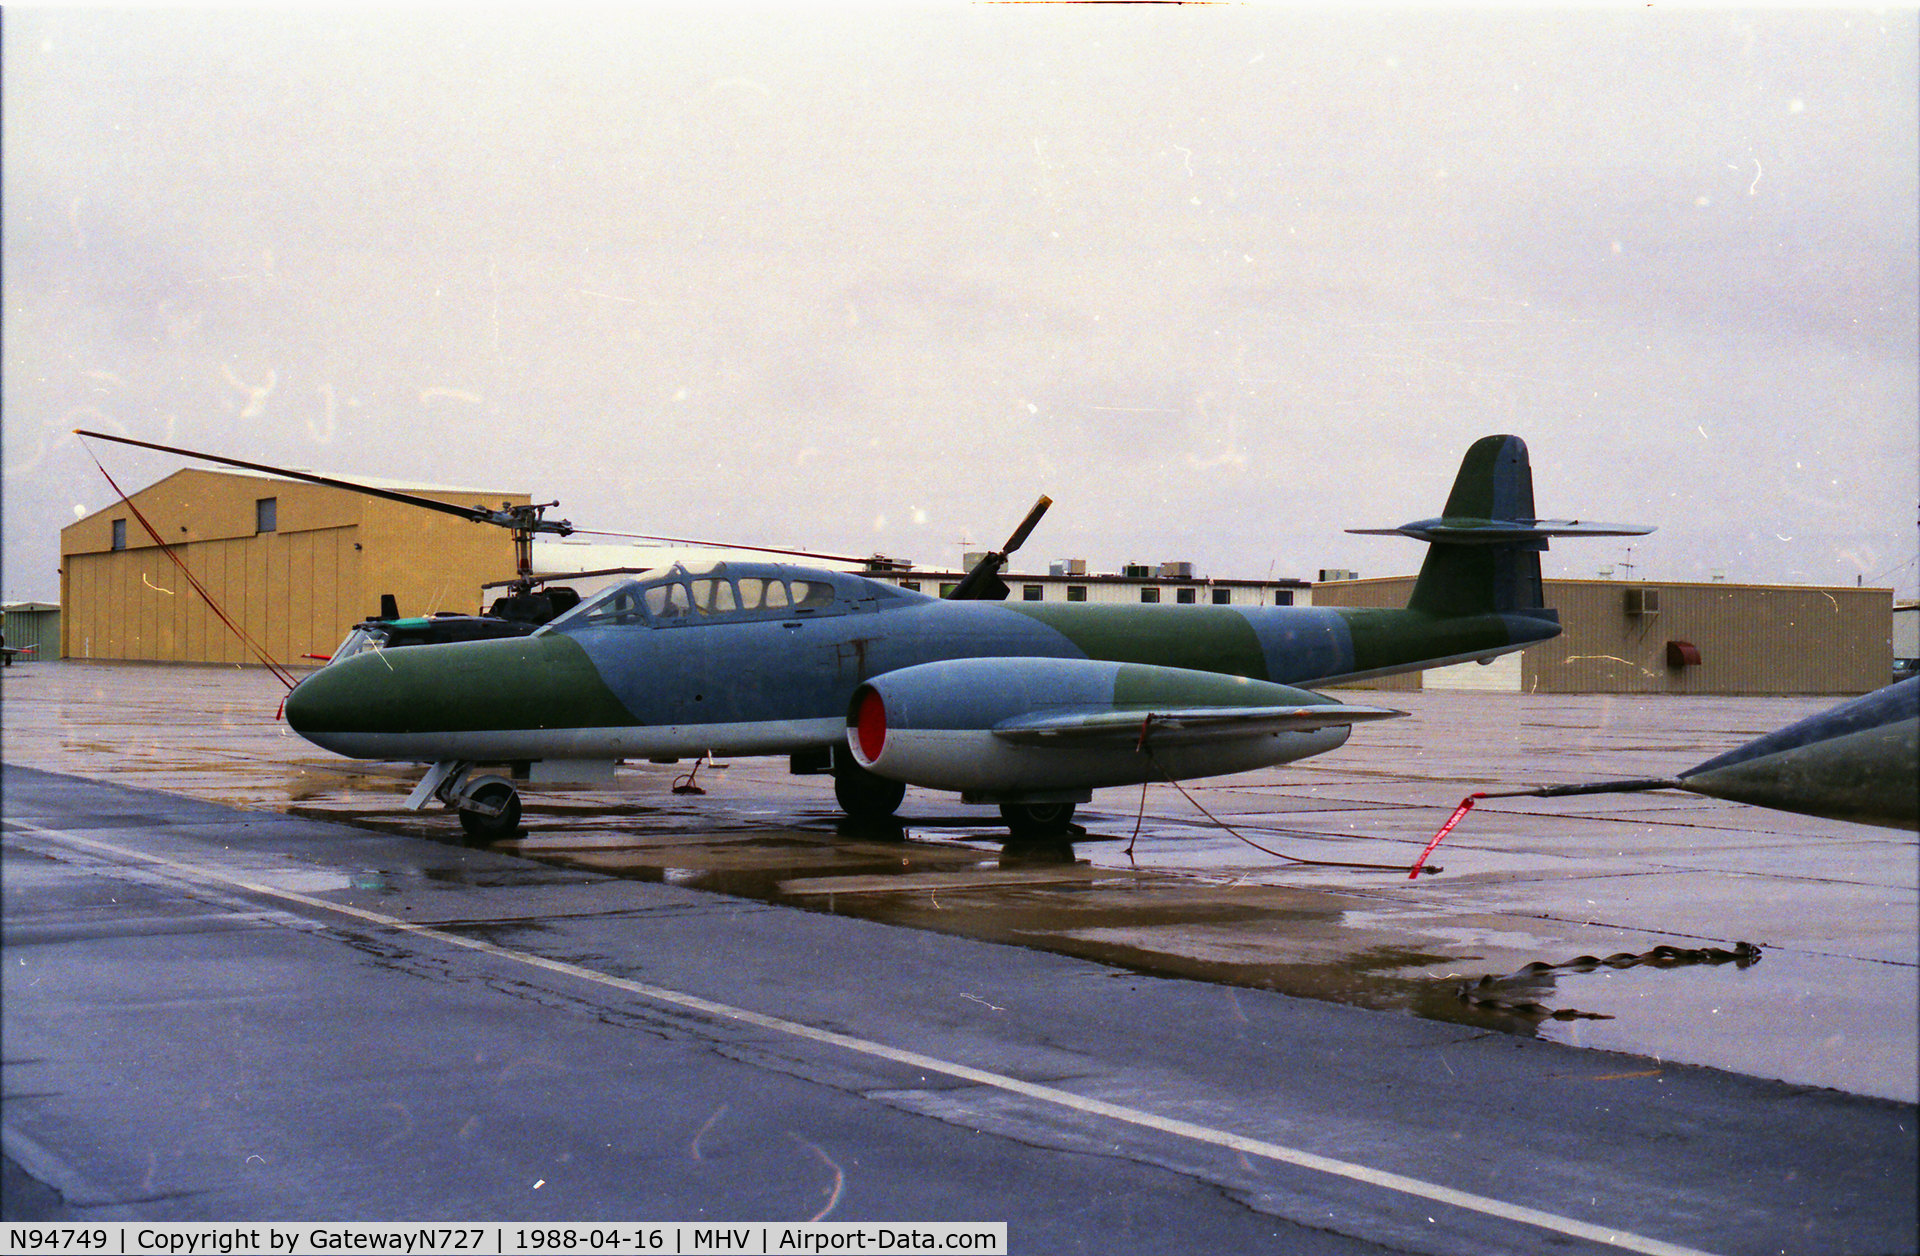 N94749, 1951 Gloster Meteor NF.11 C/N Not found N94749, Flew with both the RAF and RN.